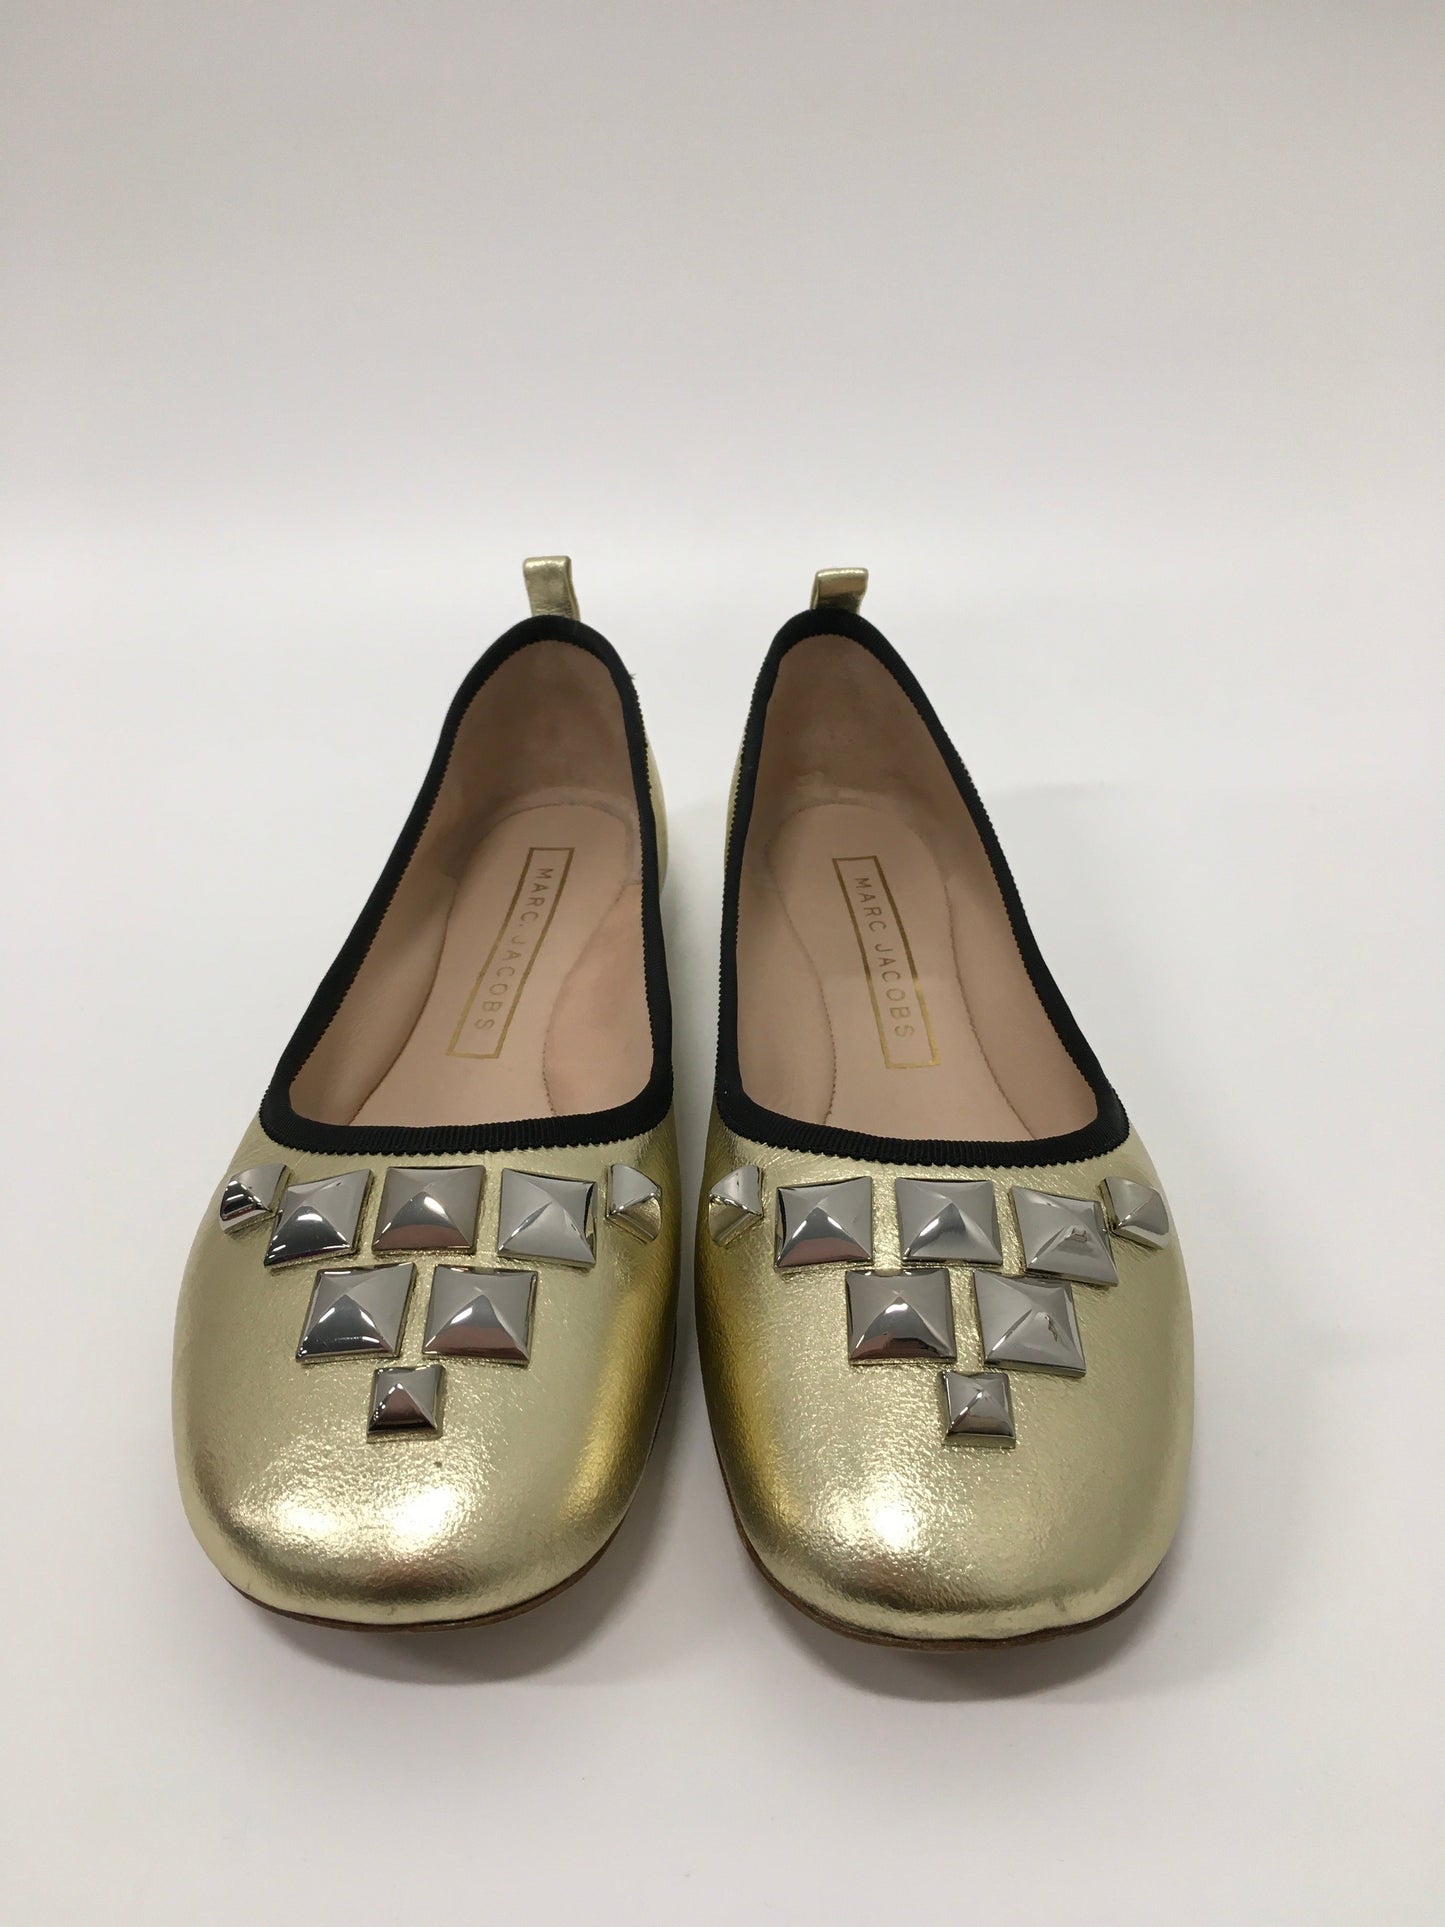 Shoes Flats Ballet By Marc Jacobs  Size: 8